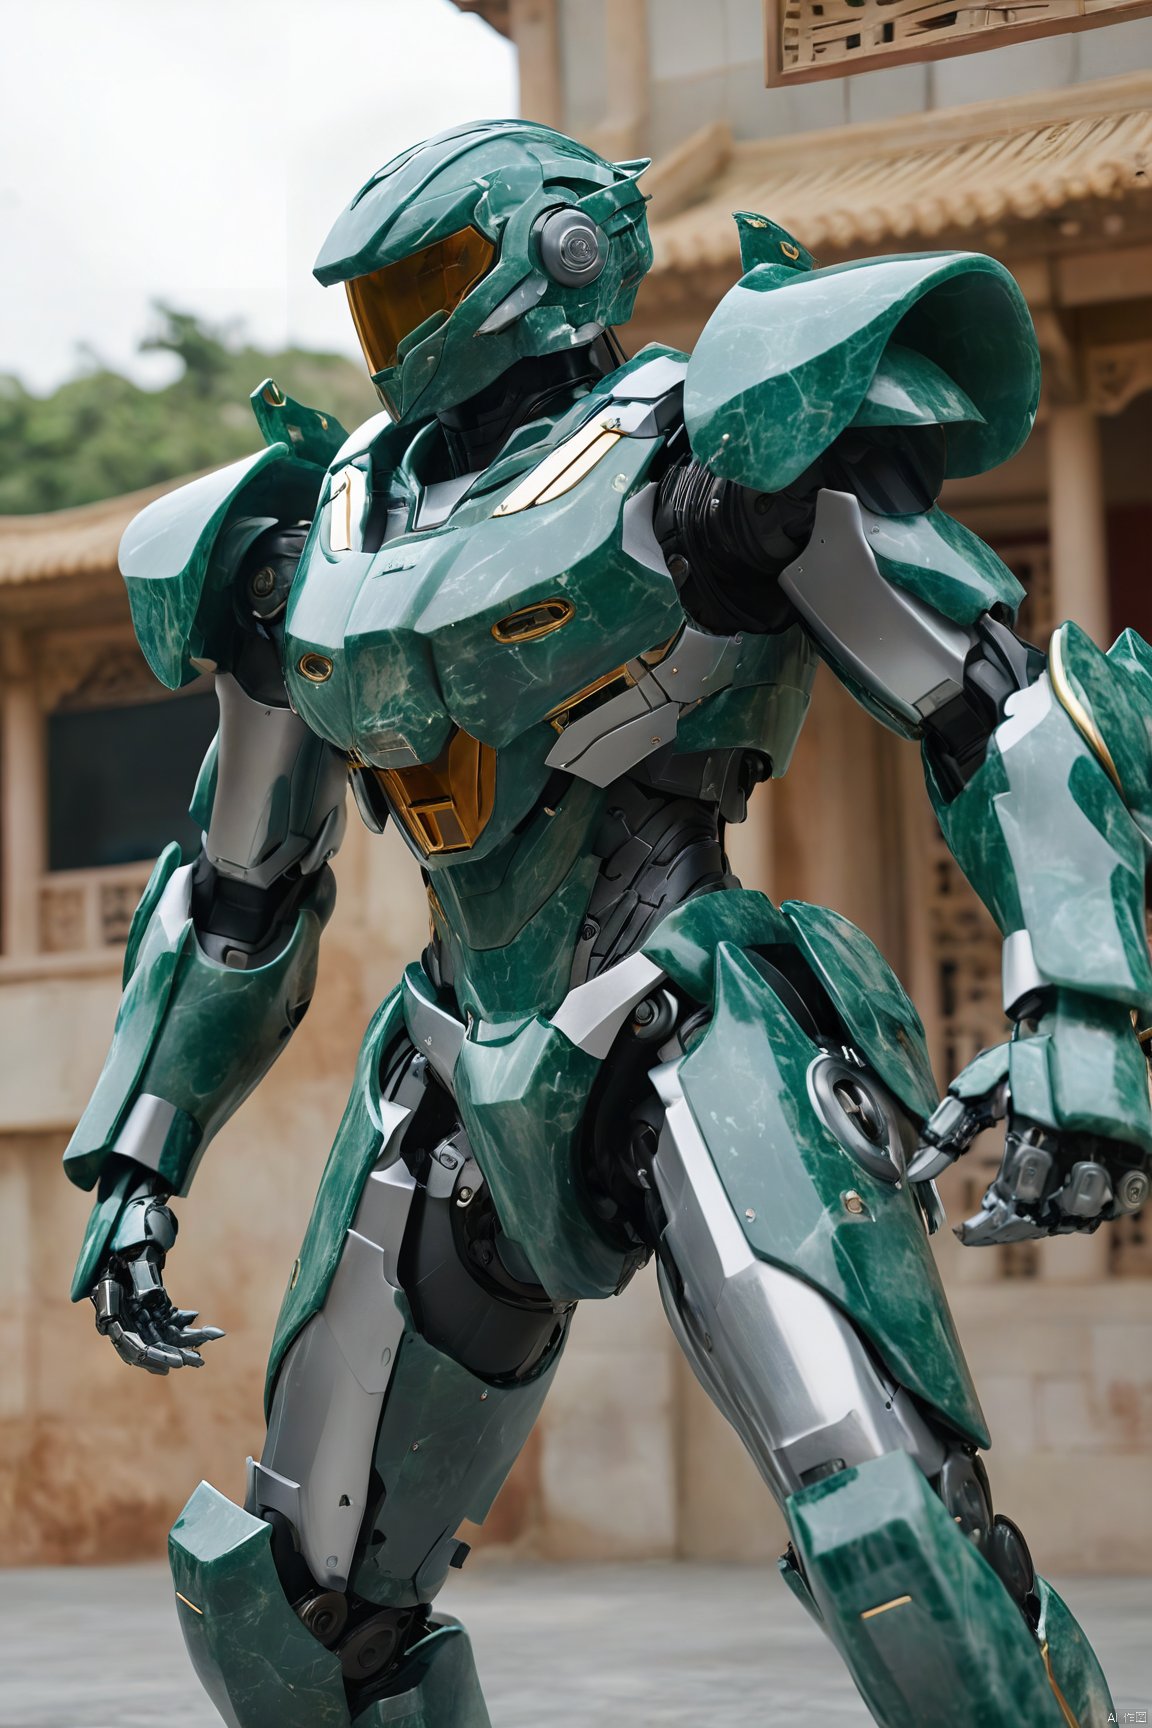  HUBG_Chinese_Jade,wide shot,
ultra highres, masterpiece, best quality, , car, from side, 
HUBG_Mecha_Armor,